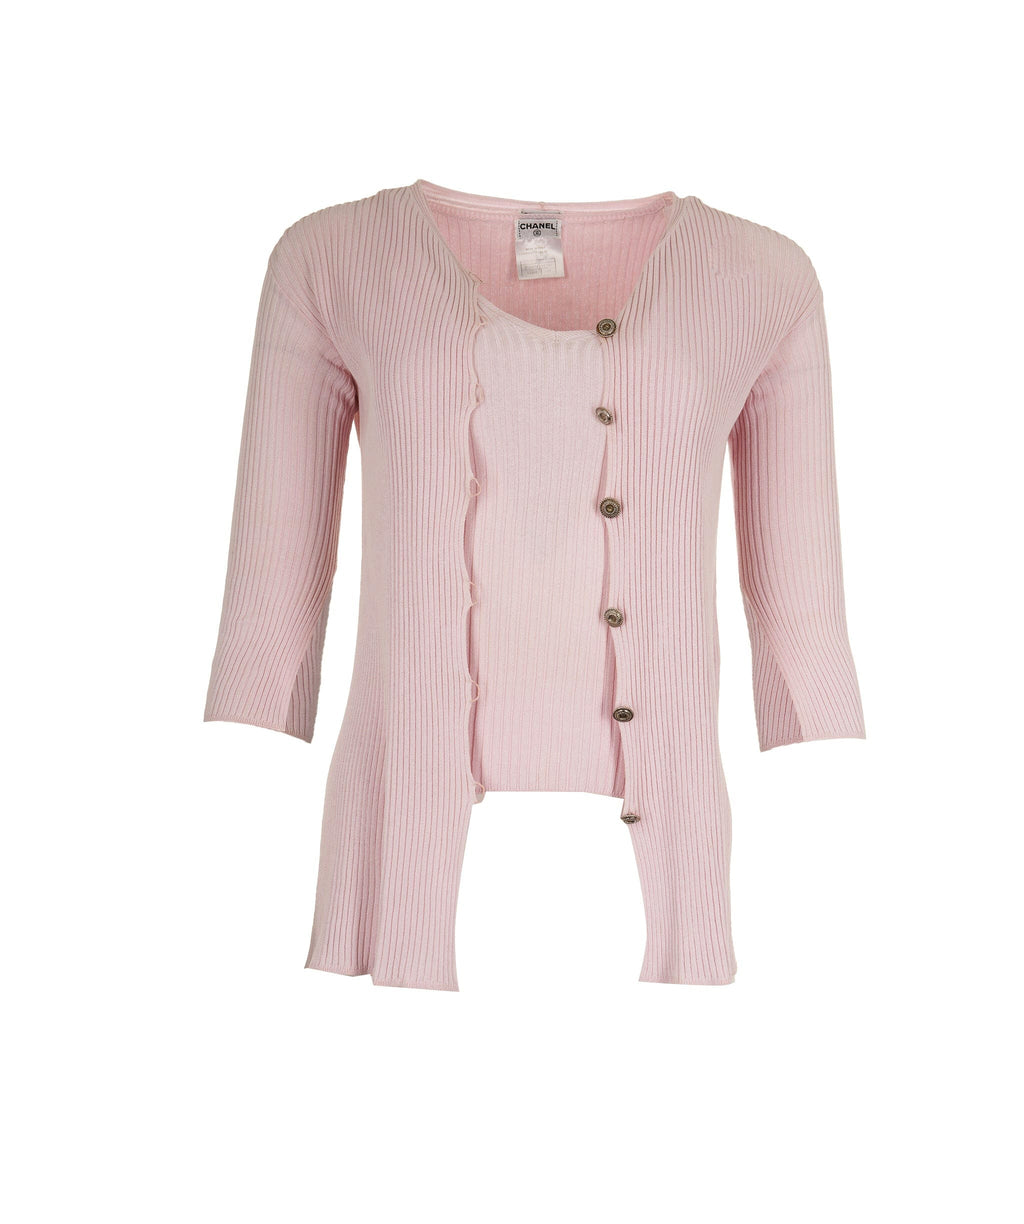 Chanel Baby Pink Top and Cardigan Set Size FR 38 (UK 10) ASL9299 ...